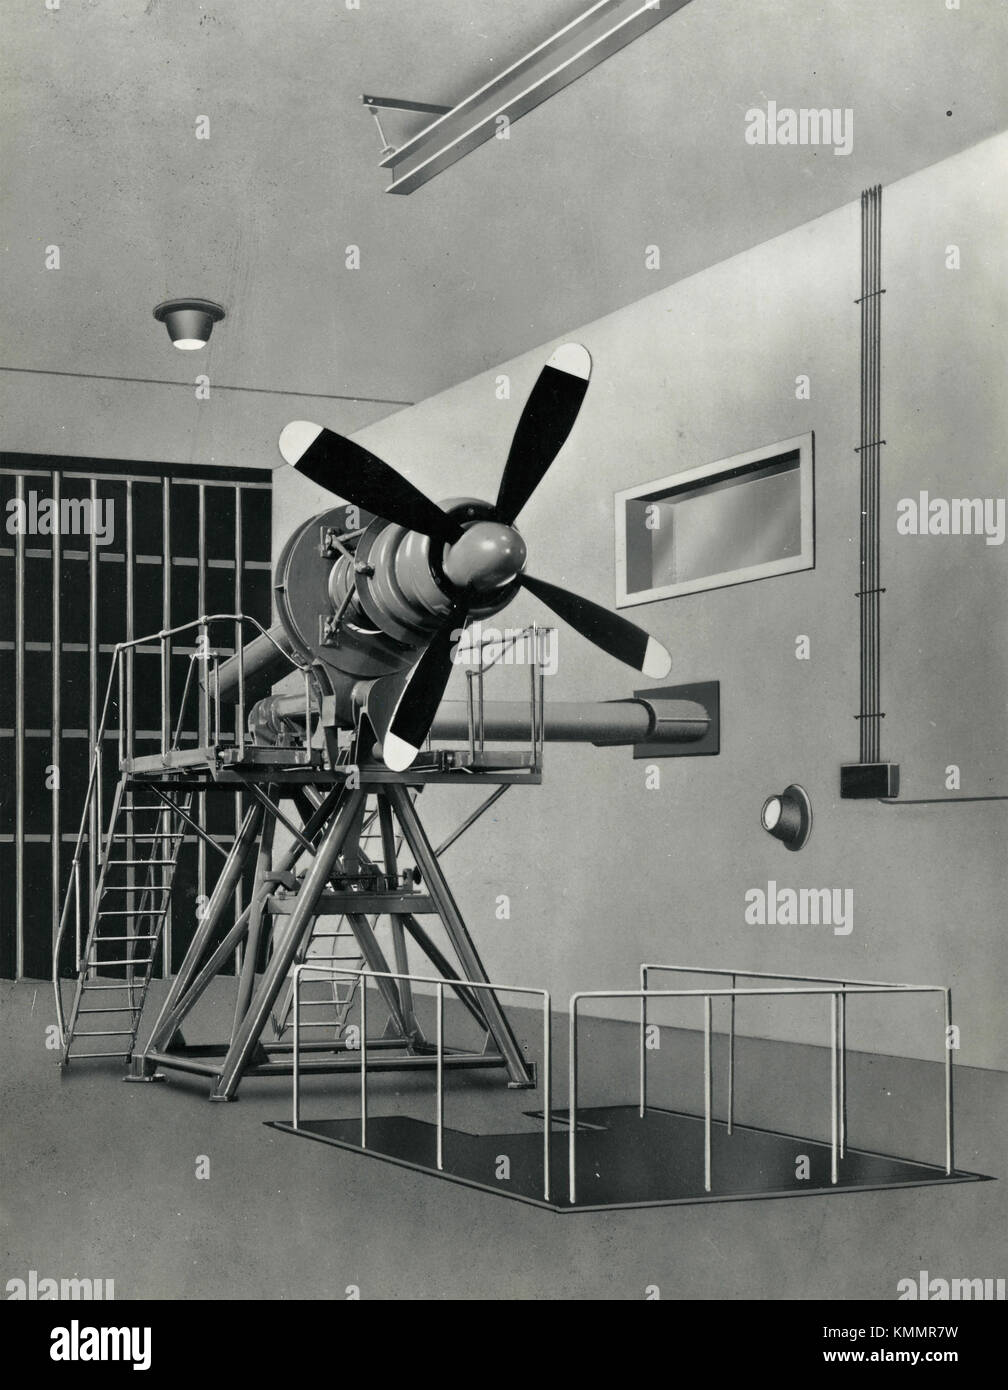 Torque reaction hangar stand for turbo-prop engines, 1940s Stock Photo